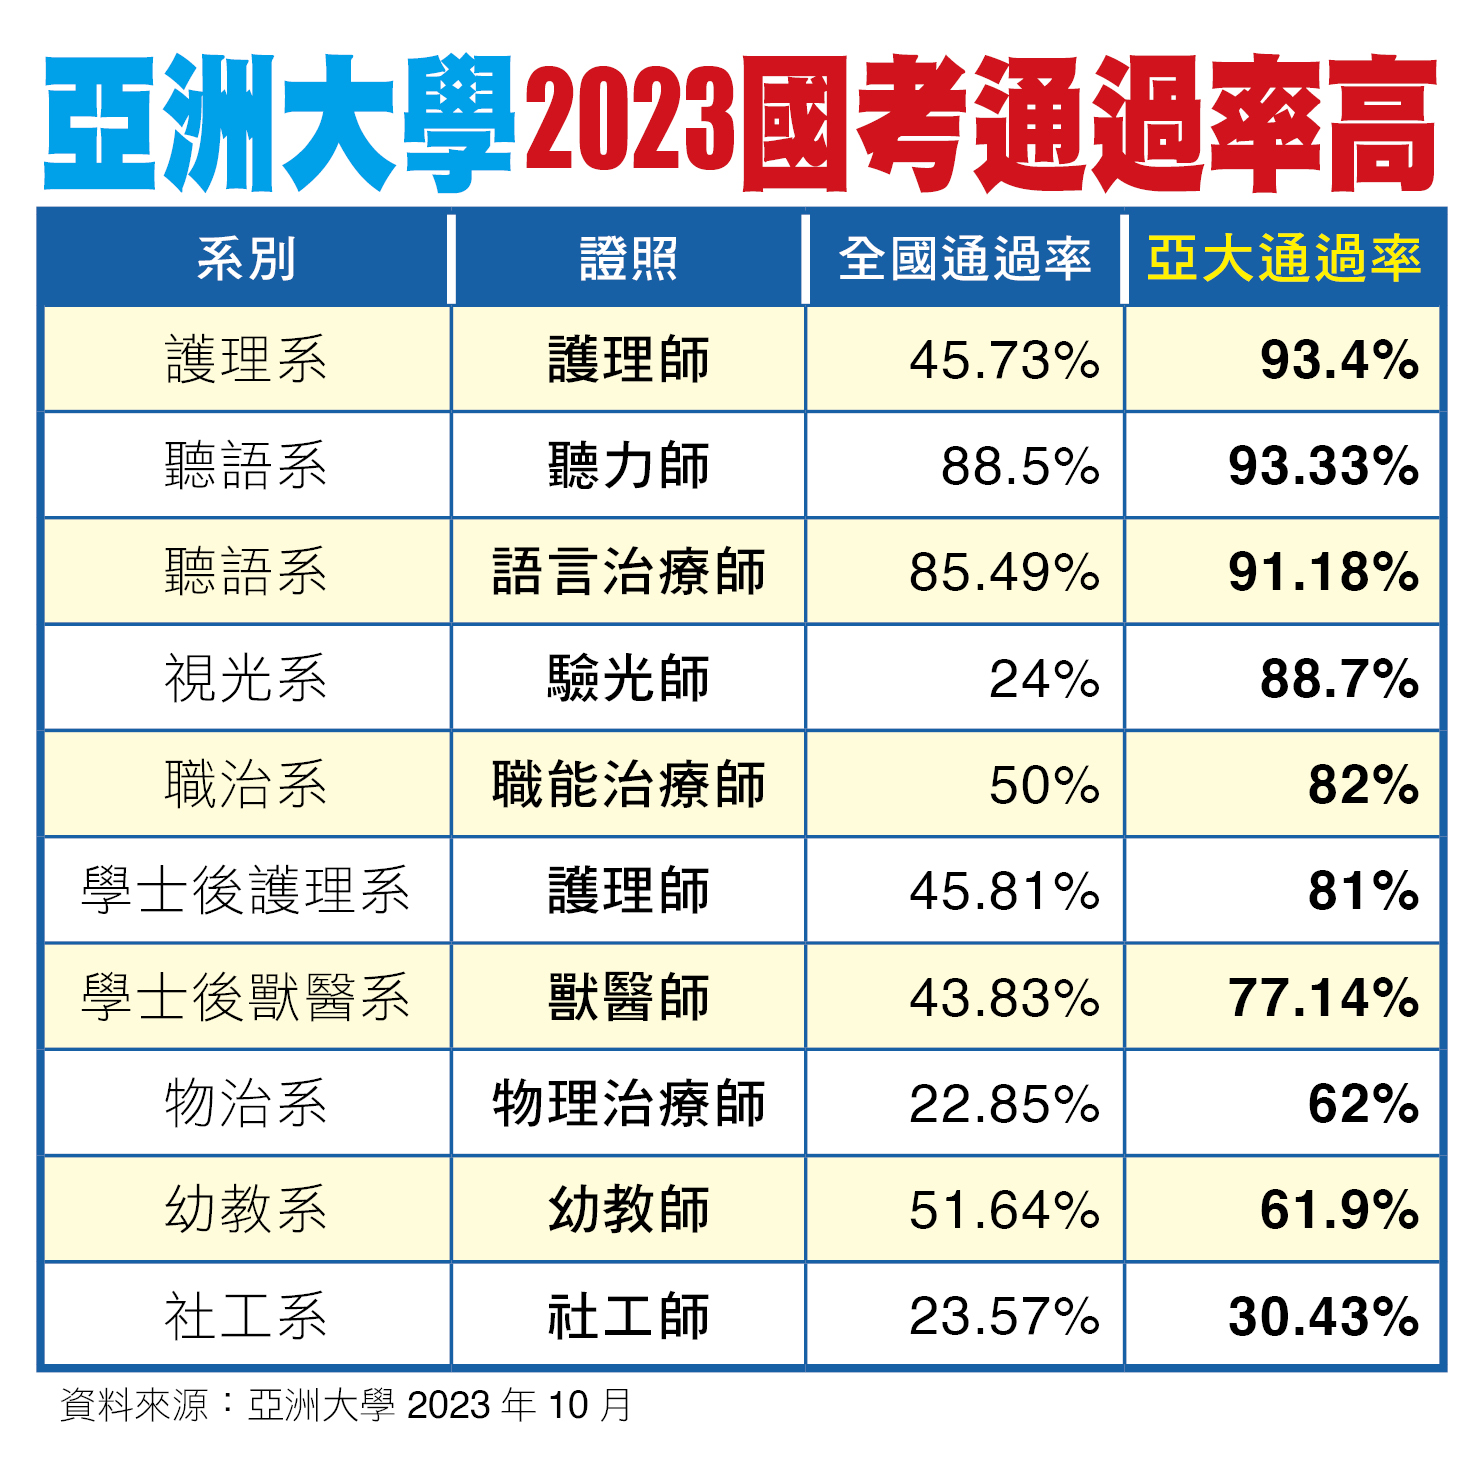 Asia University achieving high pass rates in the 2023 National licensing examination, with all 10 examinations surpassing the national average